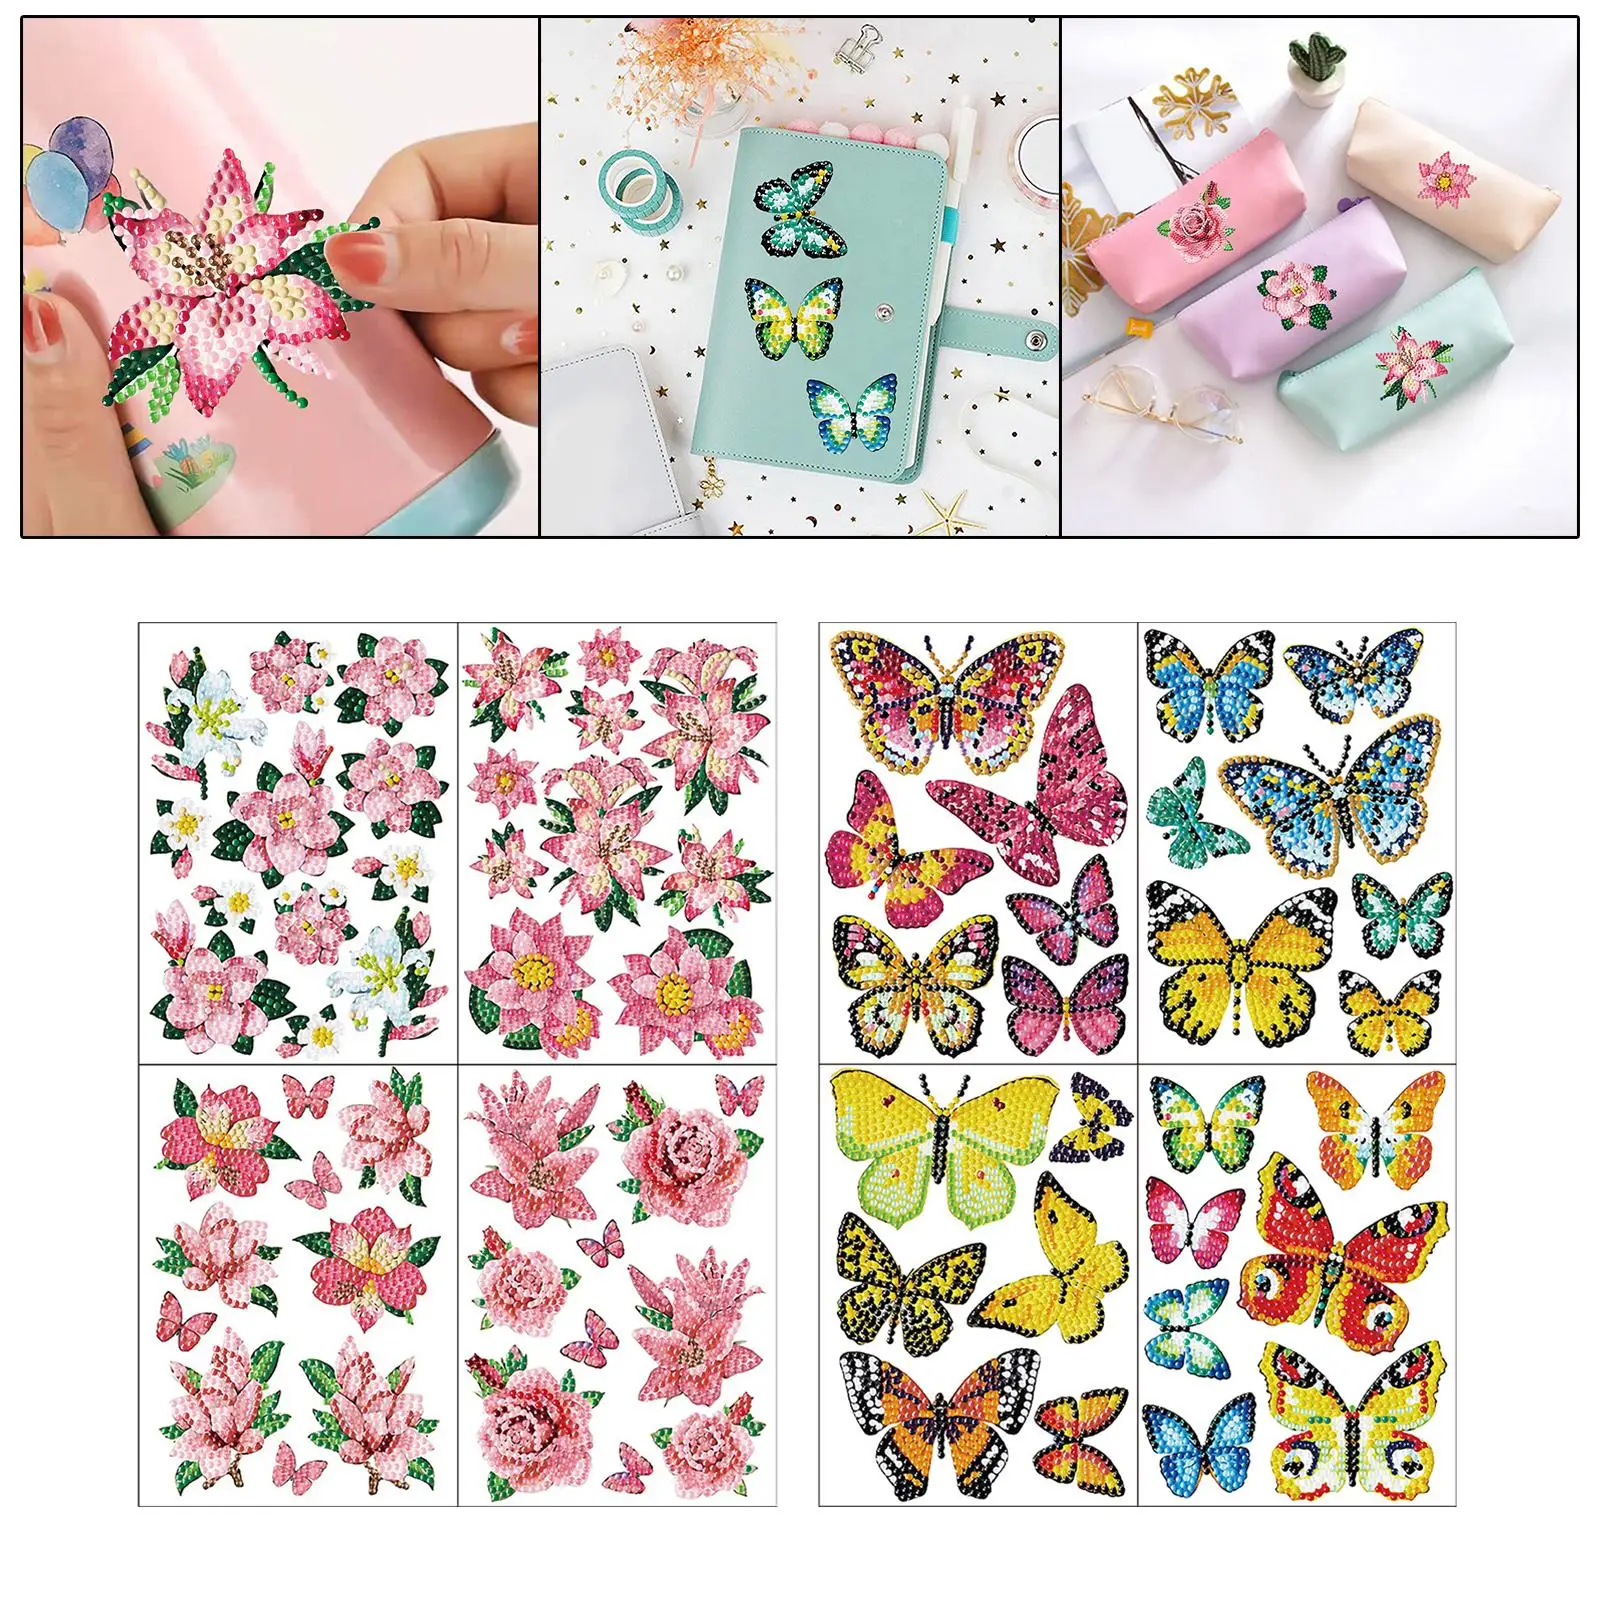 5D DIY Diamond Painting Stickers Set Supply Embroidery Kit Gift for Birthday Kids